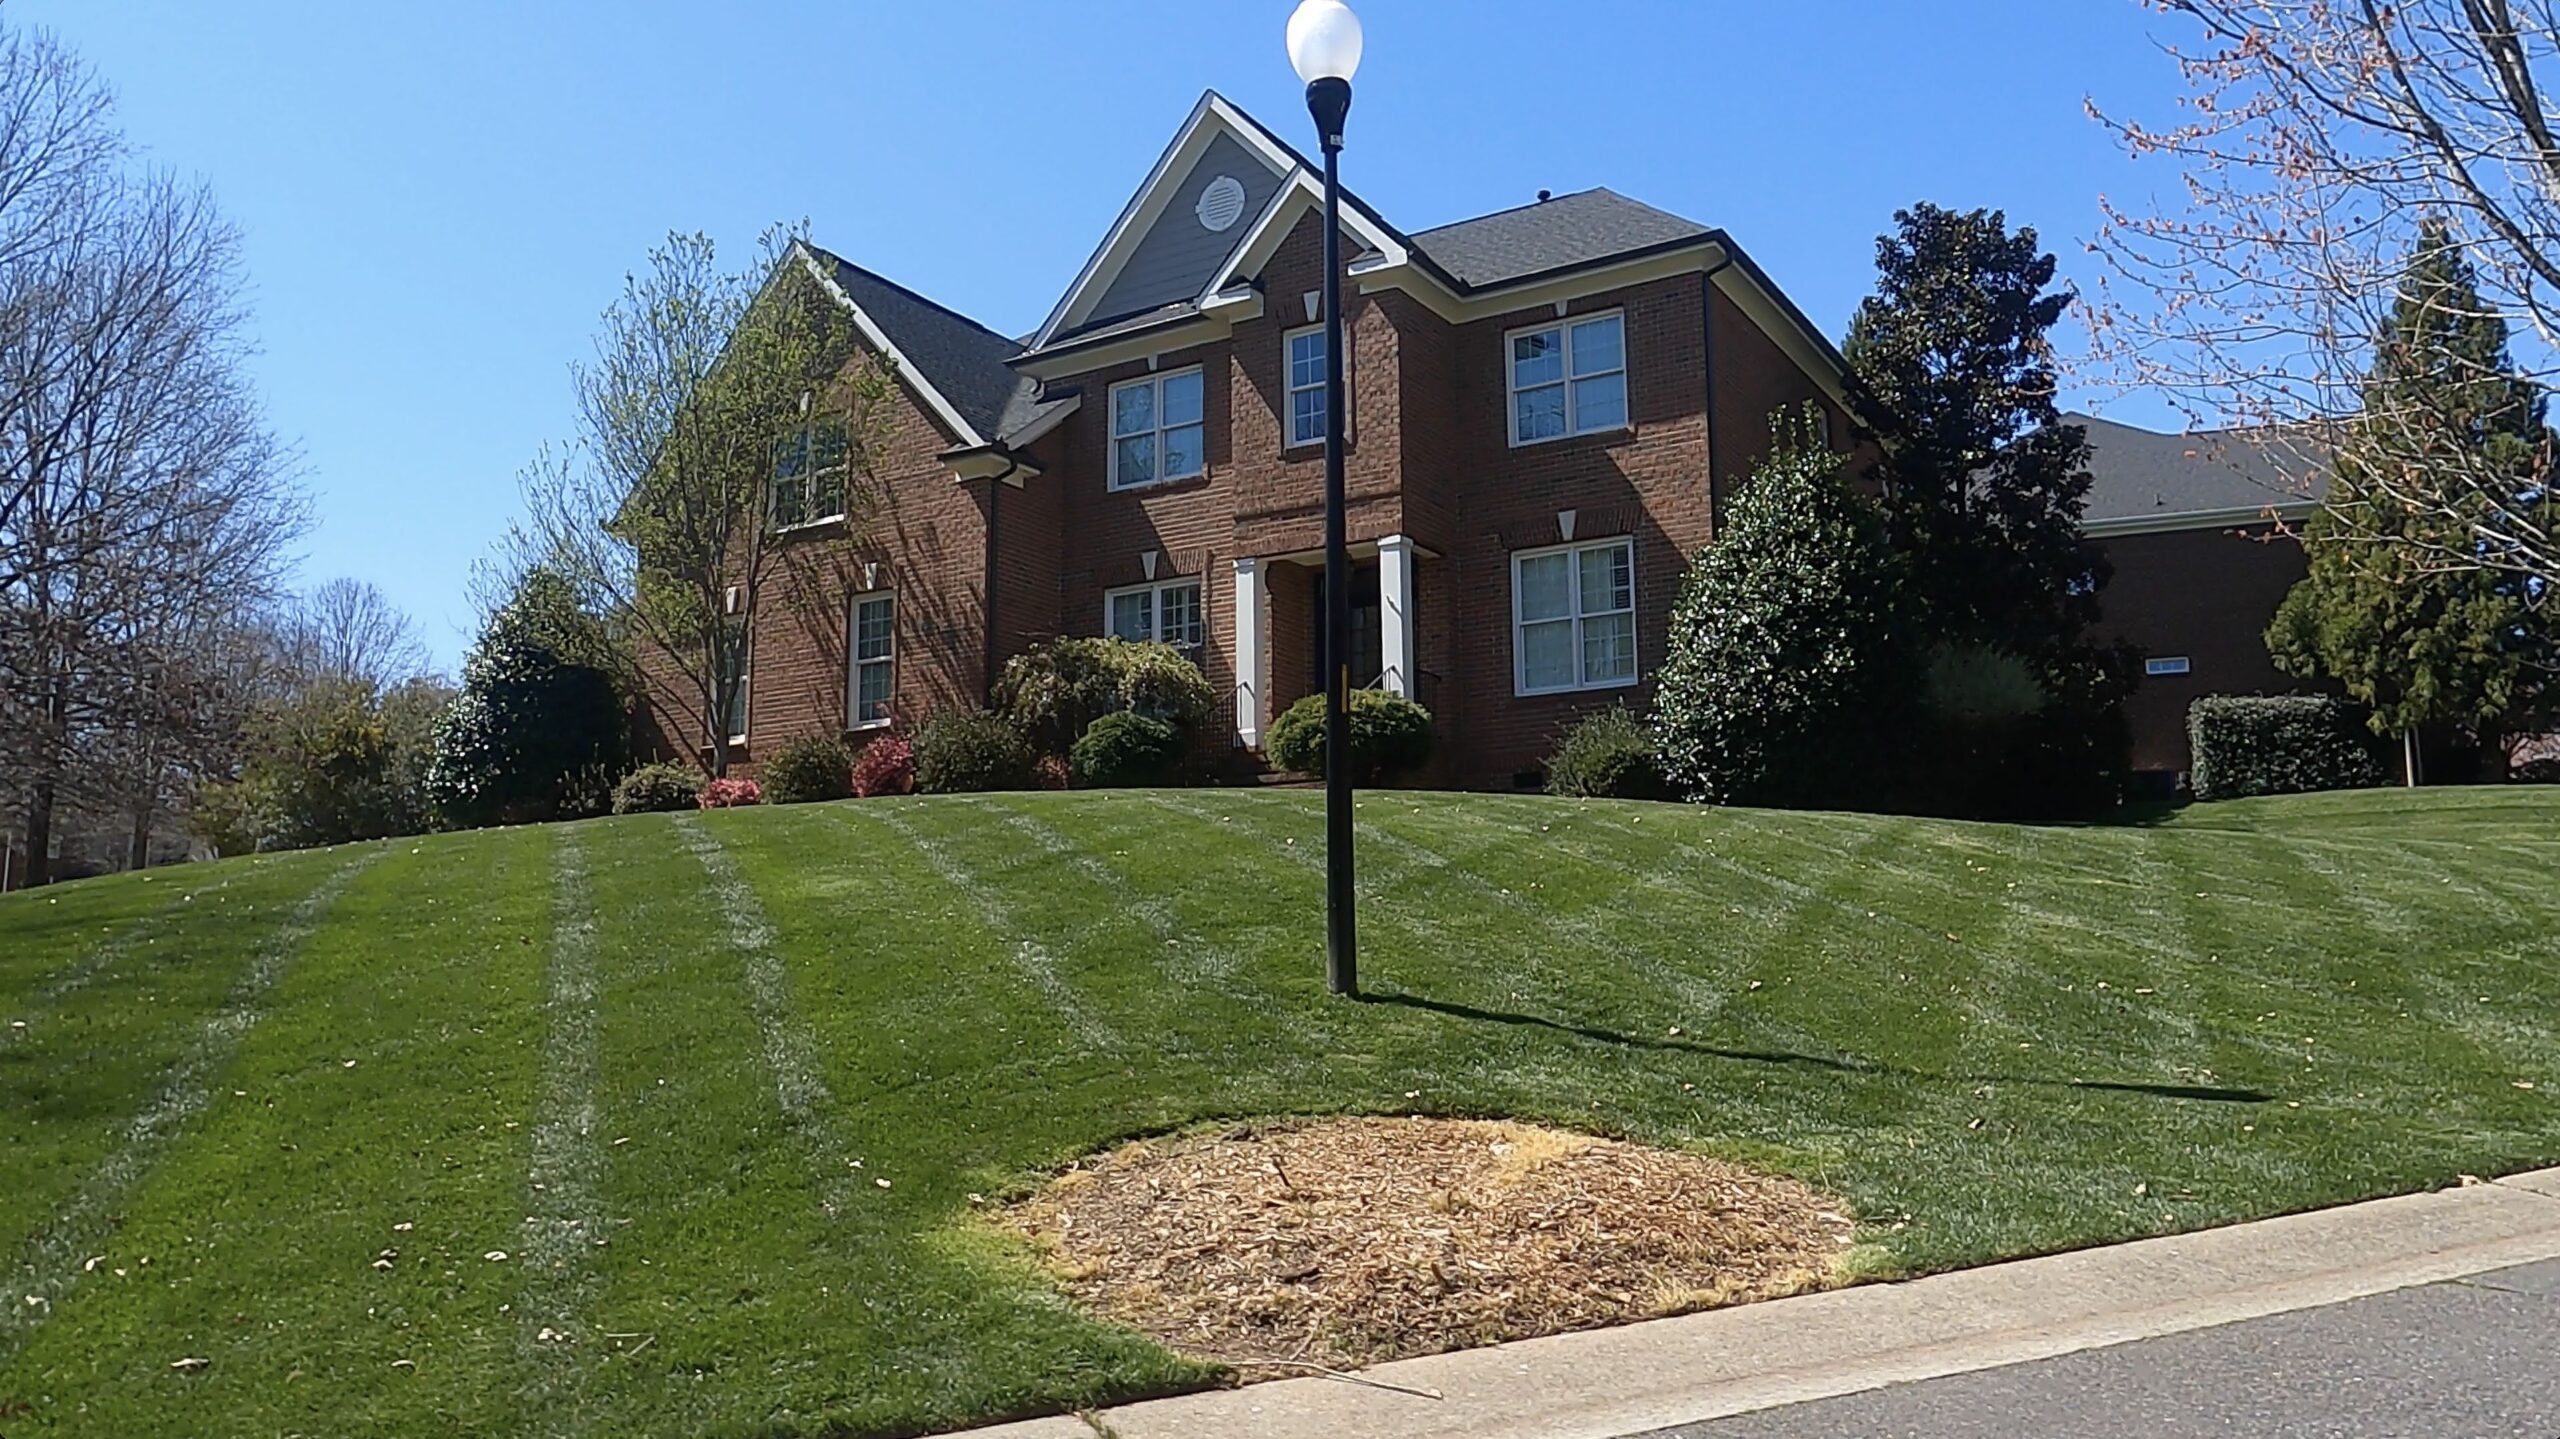 Brick Home in Holly Springs